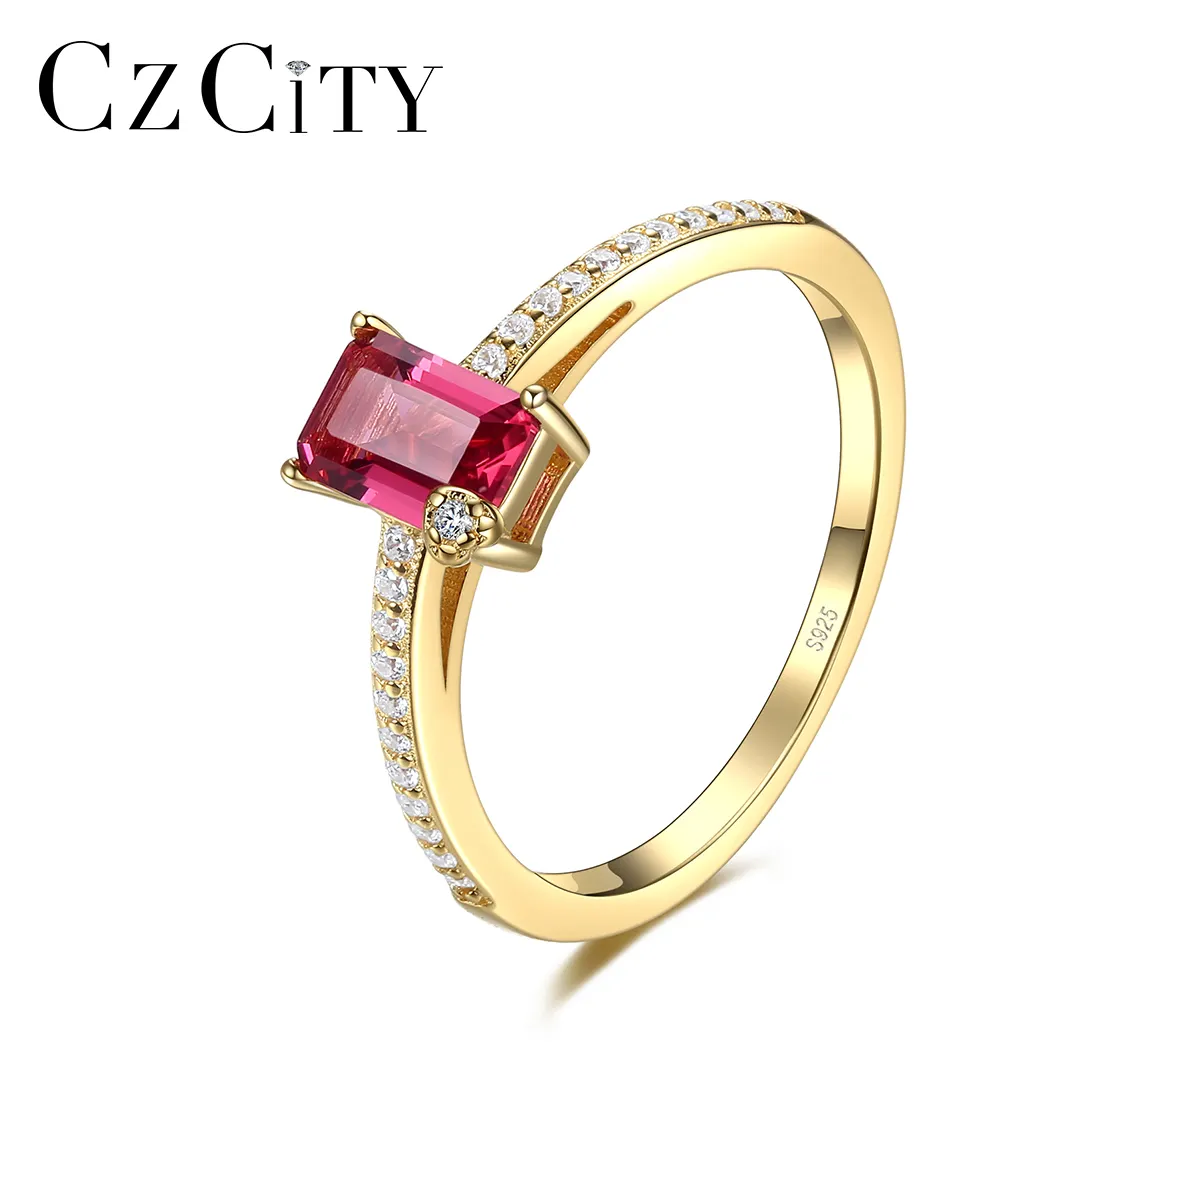 CZCITY Gold Plated S925 Sterling Silver Gemstone Ring Clear Cubic Zirconia Emerald Cut Engagement Ring Ruby Stone